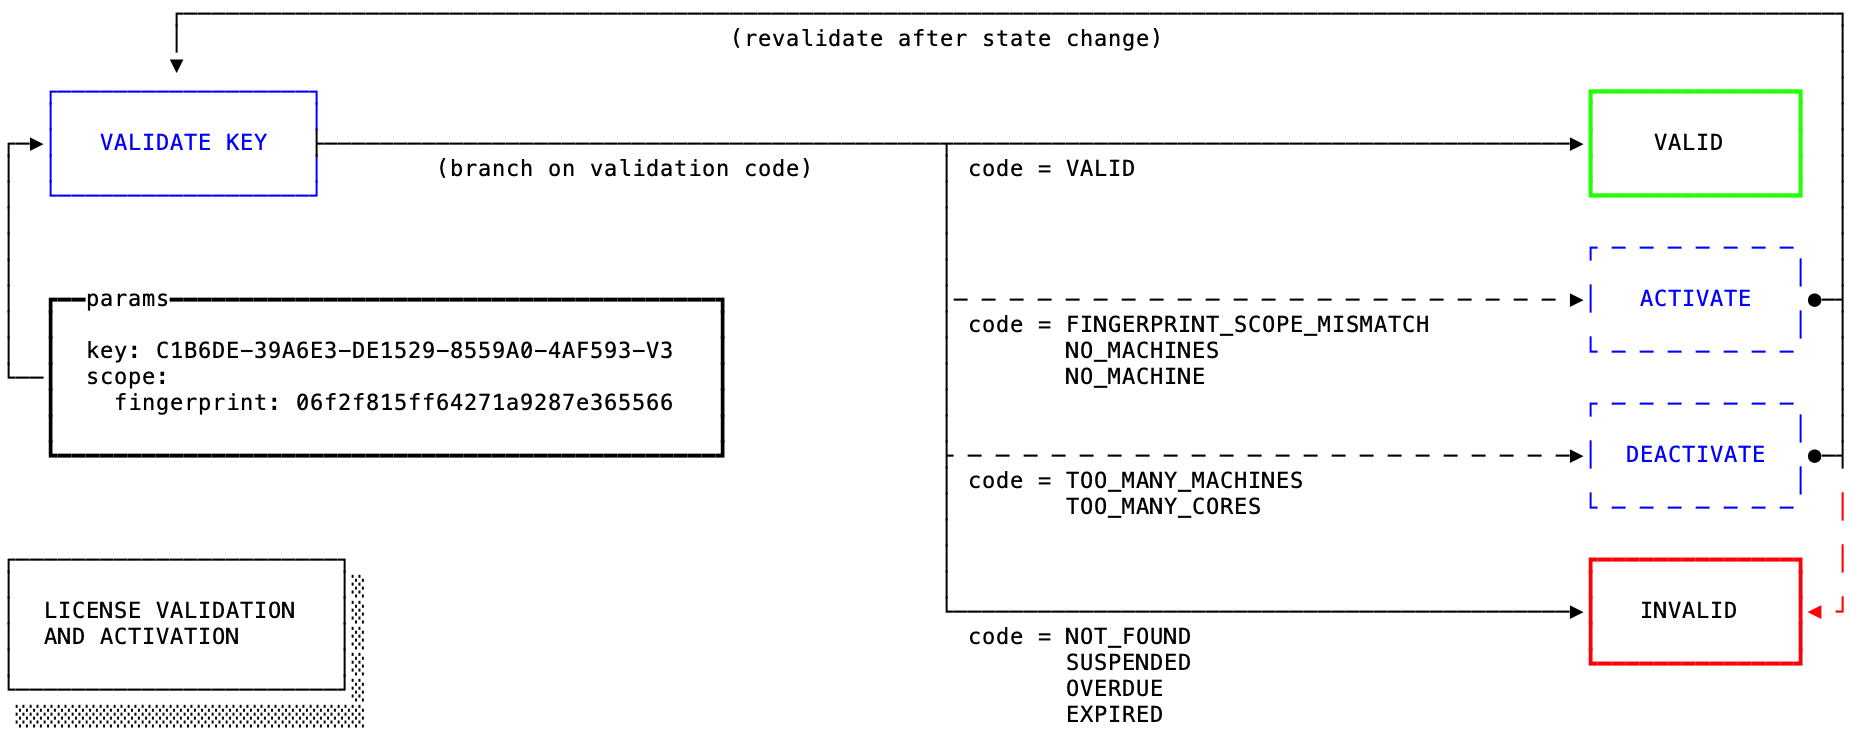 Diagram of validating and activating a license key